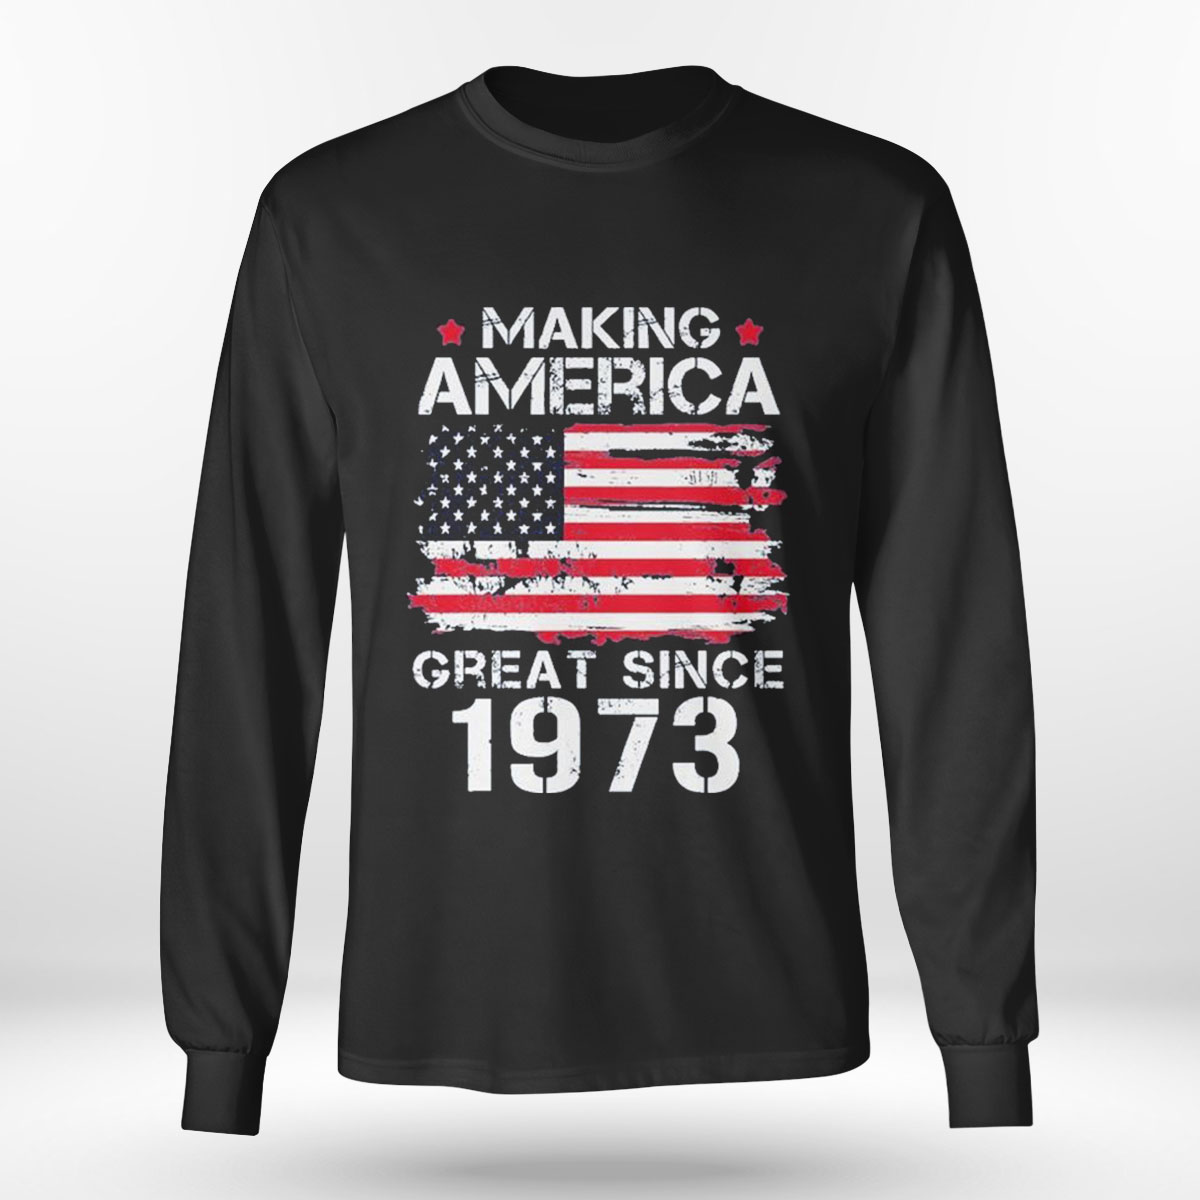 Making America Great Since 1973 Vintage Gifts 50th Birthday Love T-shirt